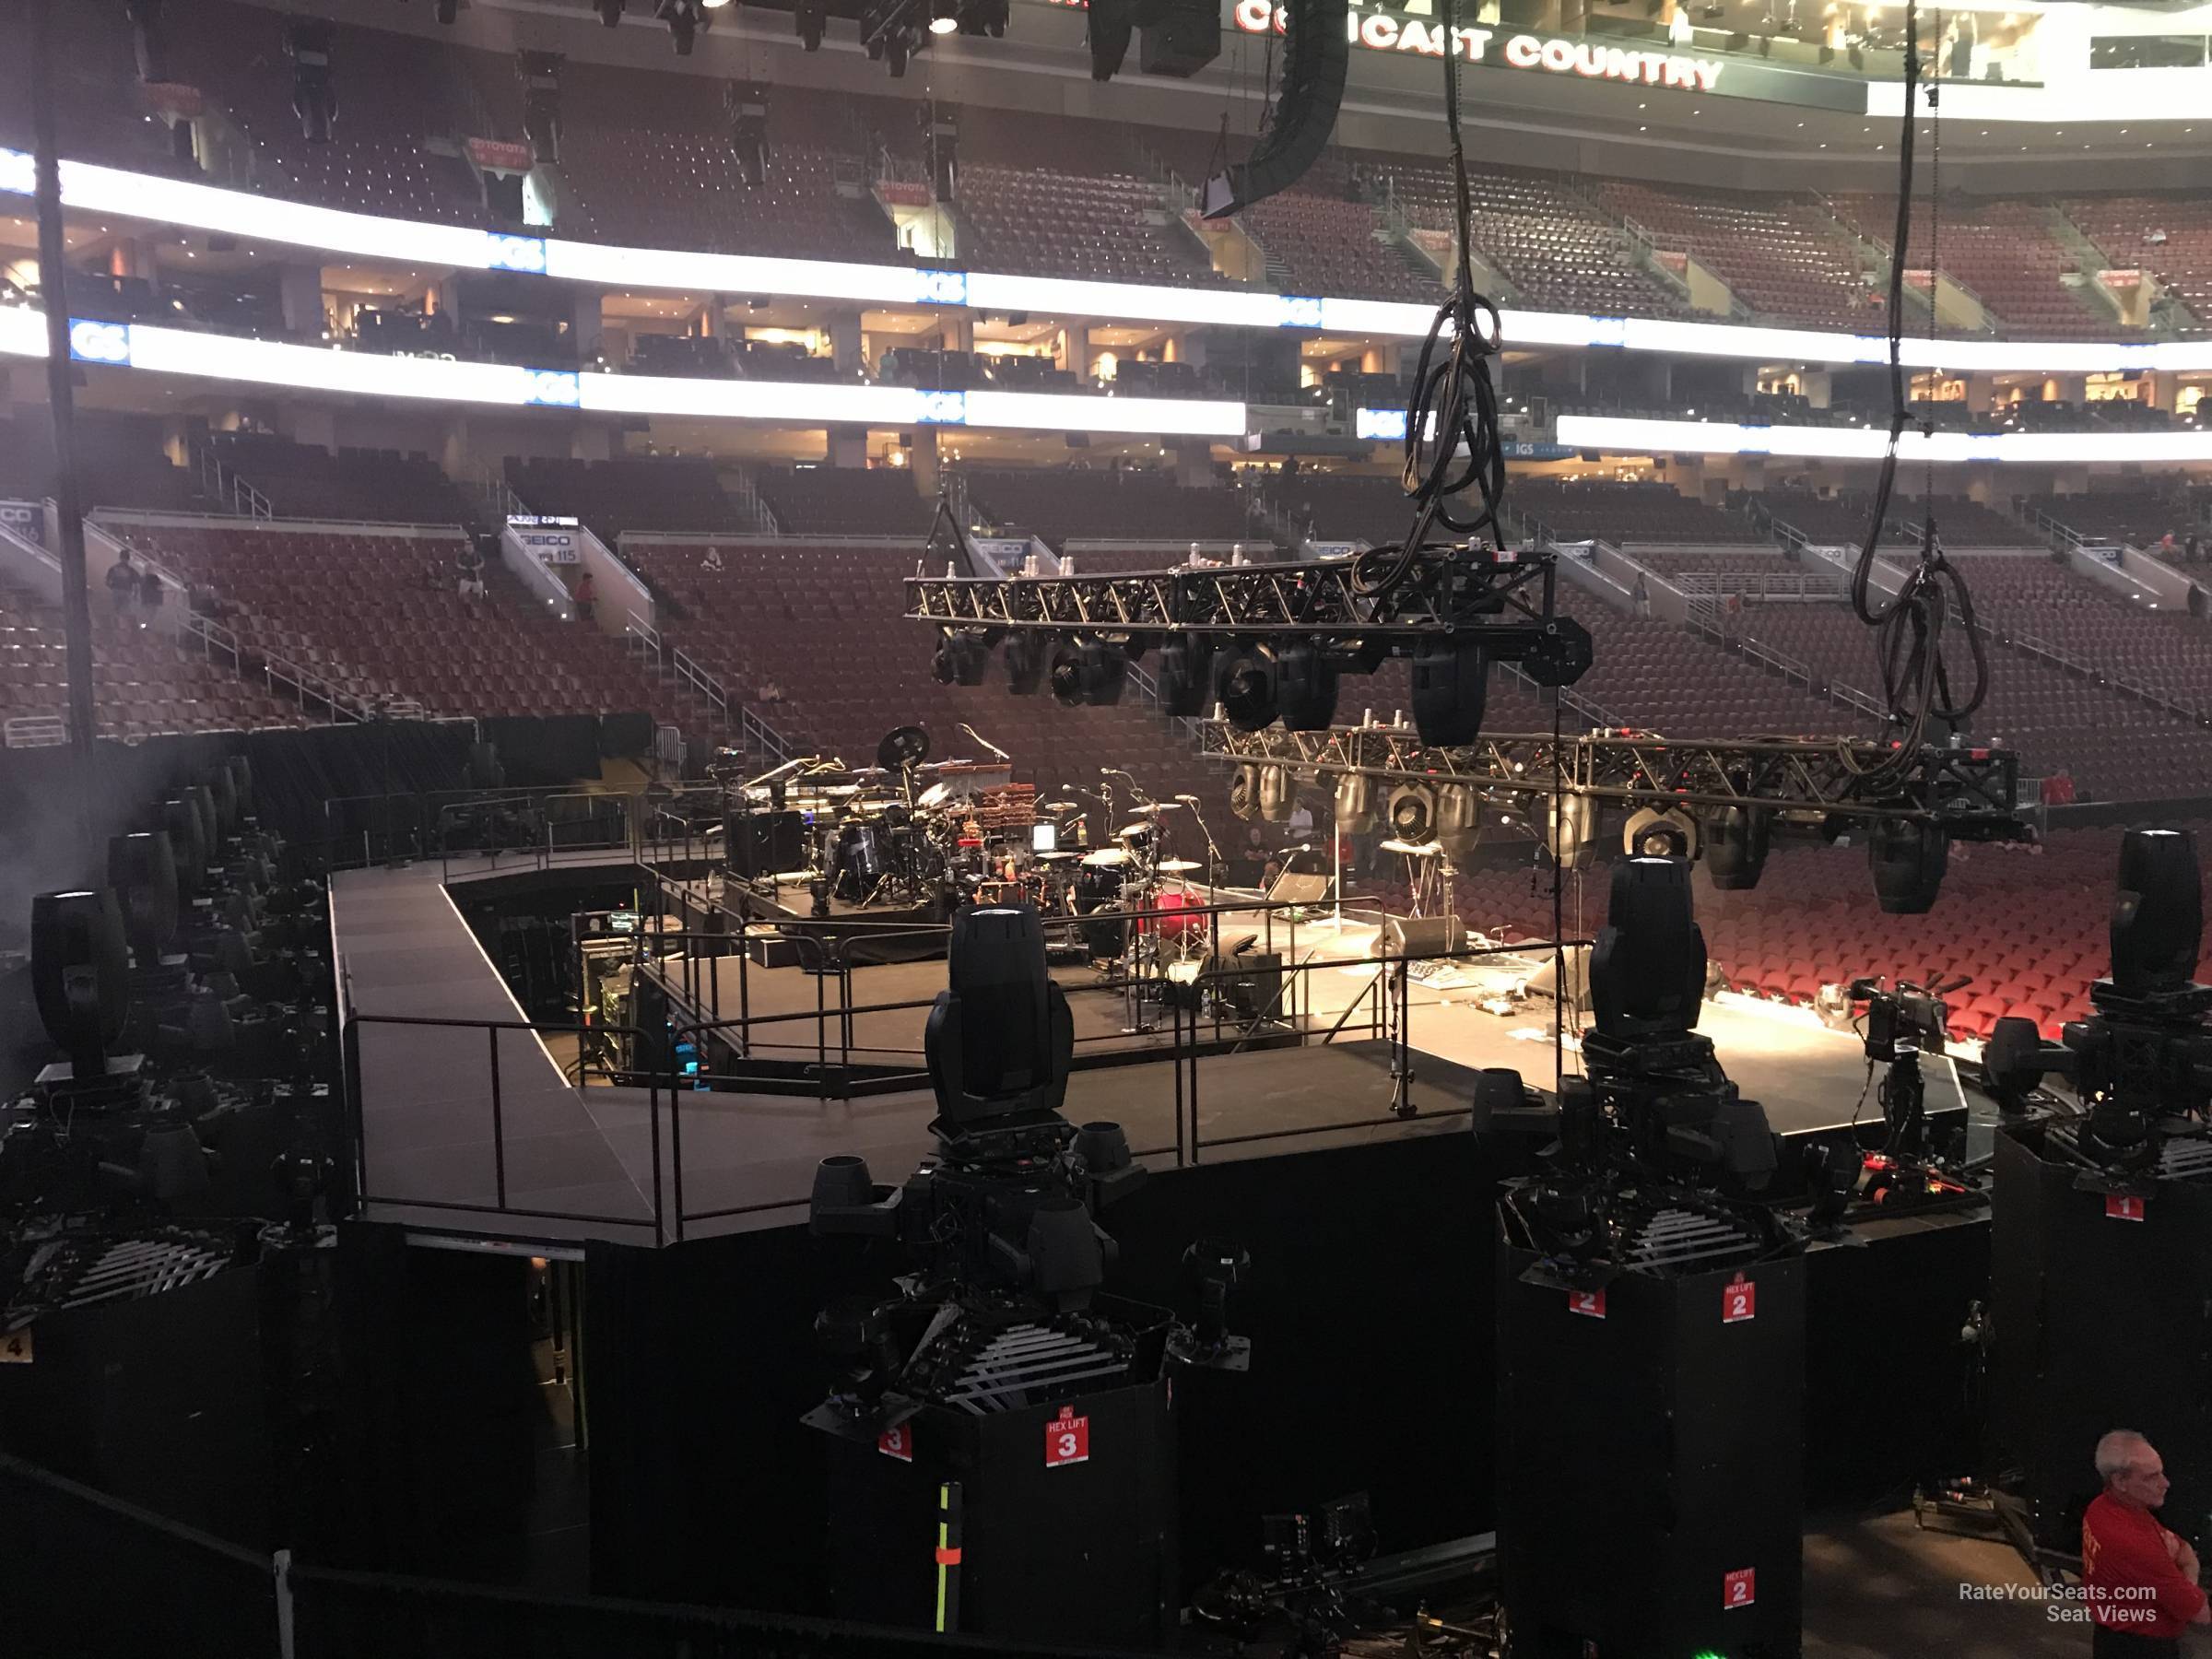 section 121, row 8 seat view  for concert - wells fargo center